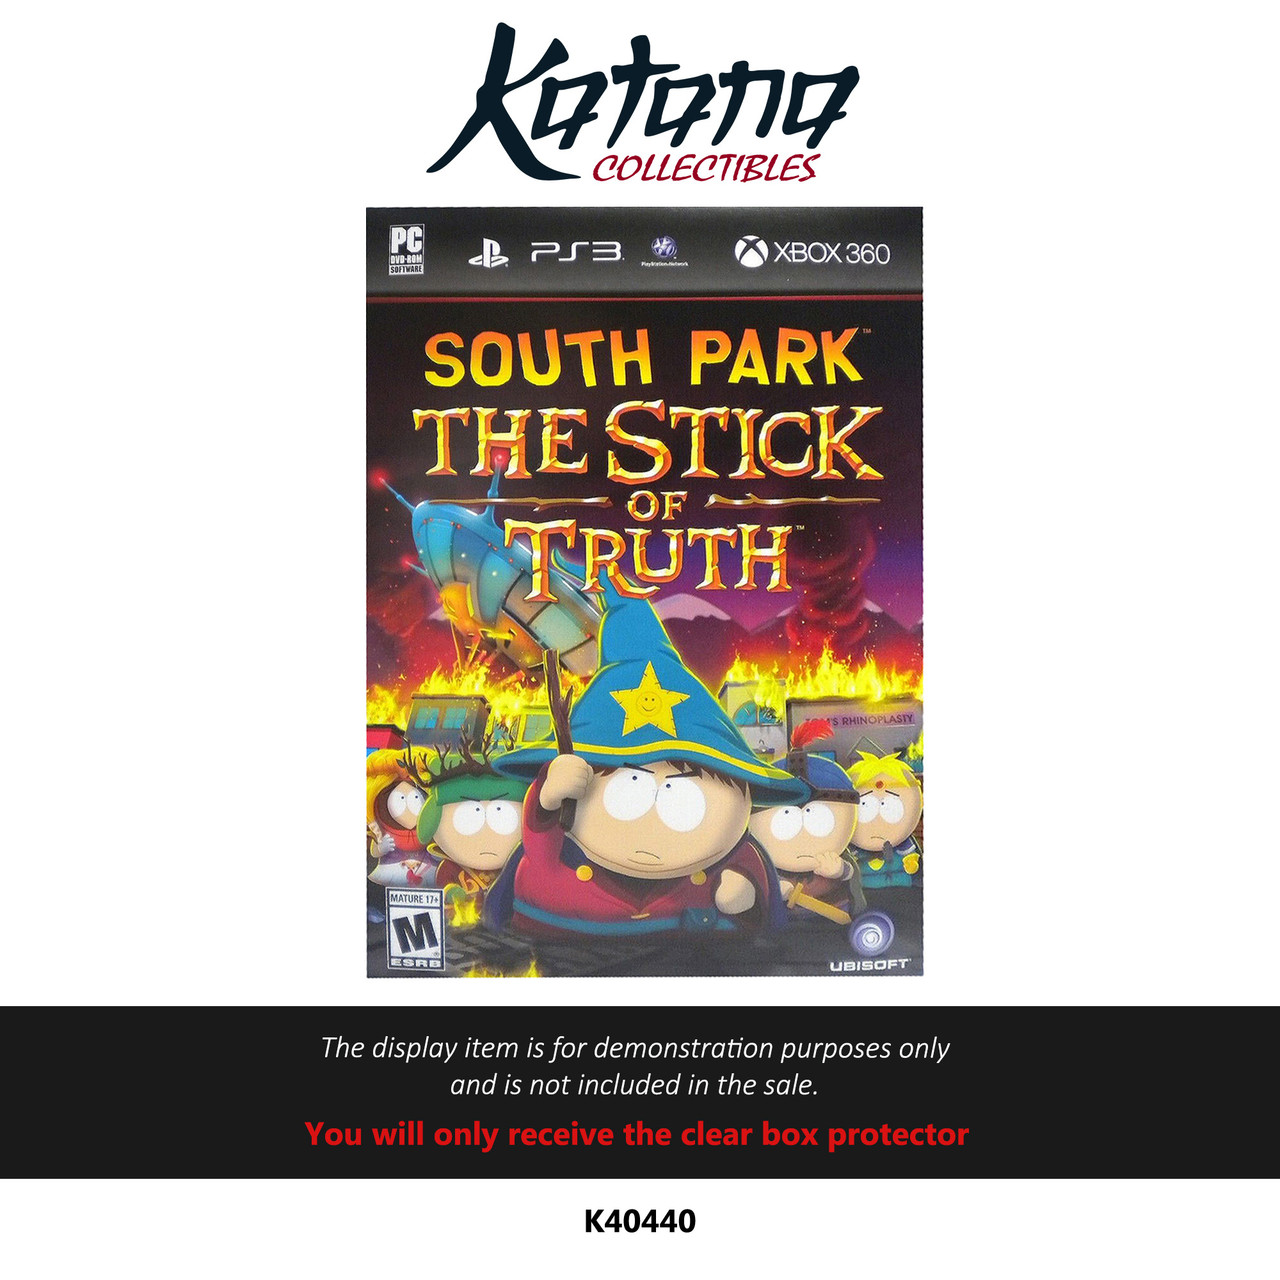 Katana Collectibles Protector For Promo Box - Store Display - Ps3/Xbox360 - South Park Stick Of Truth